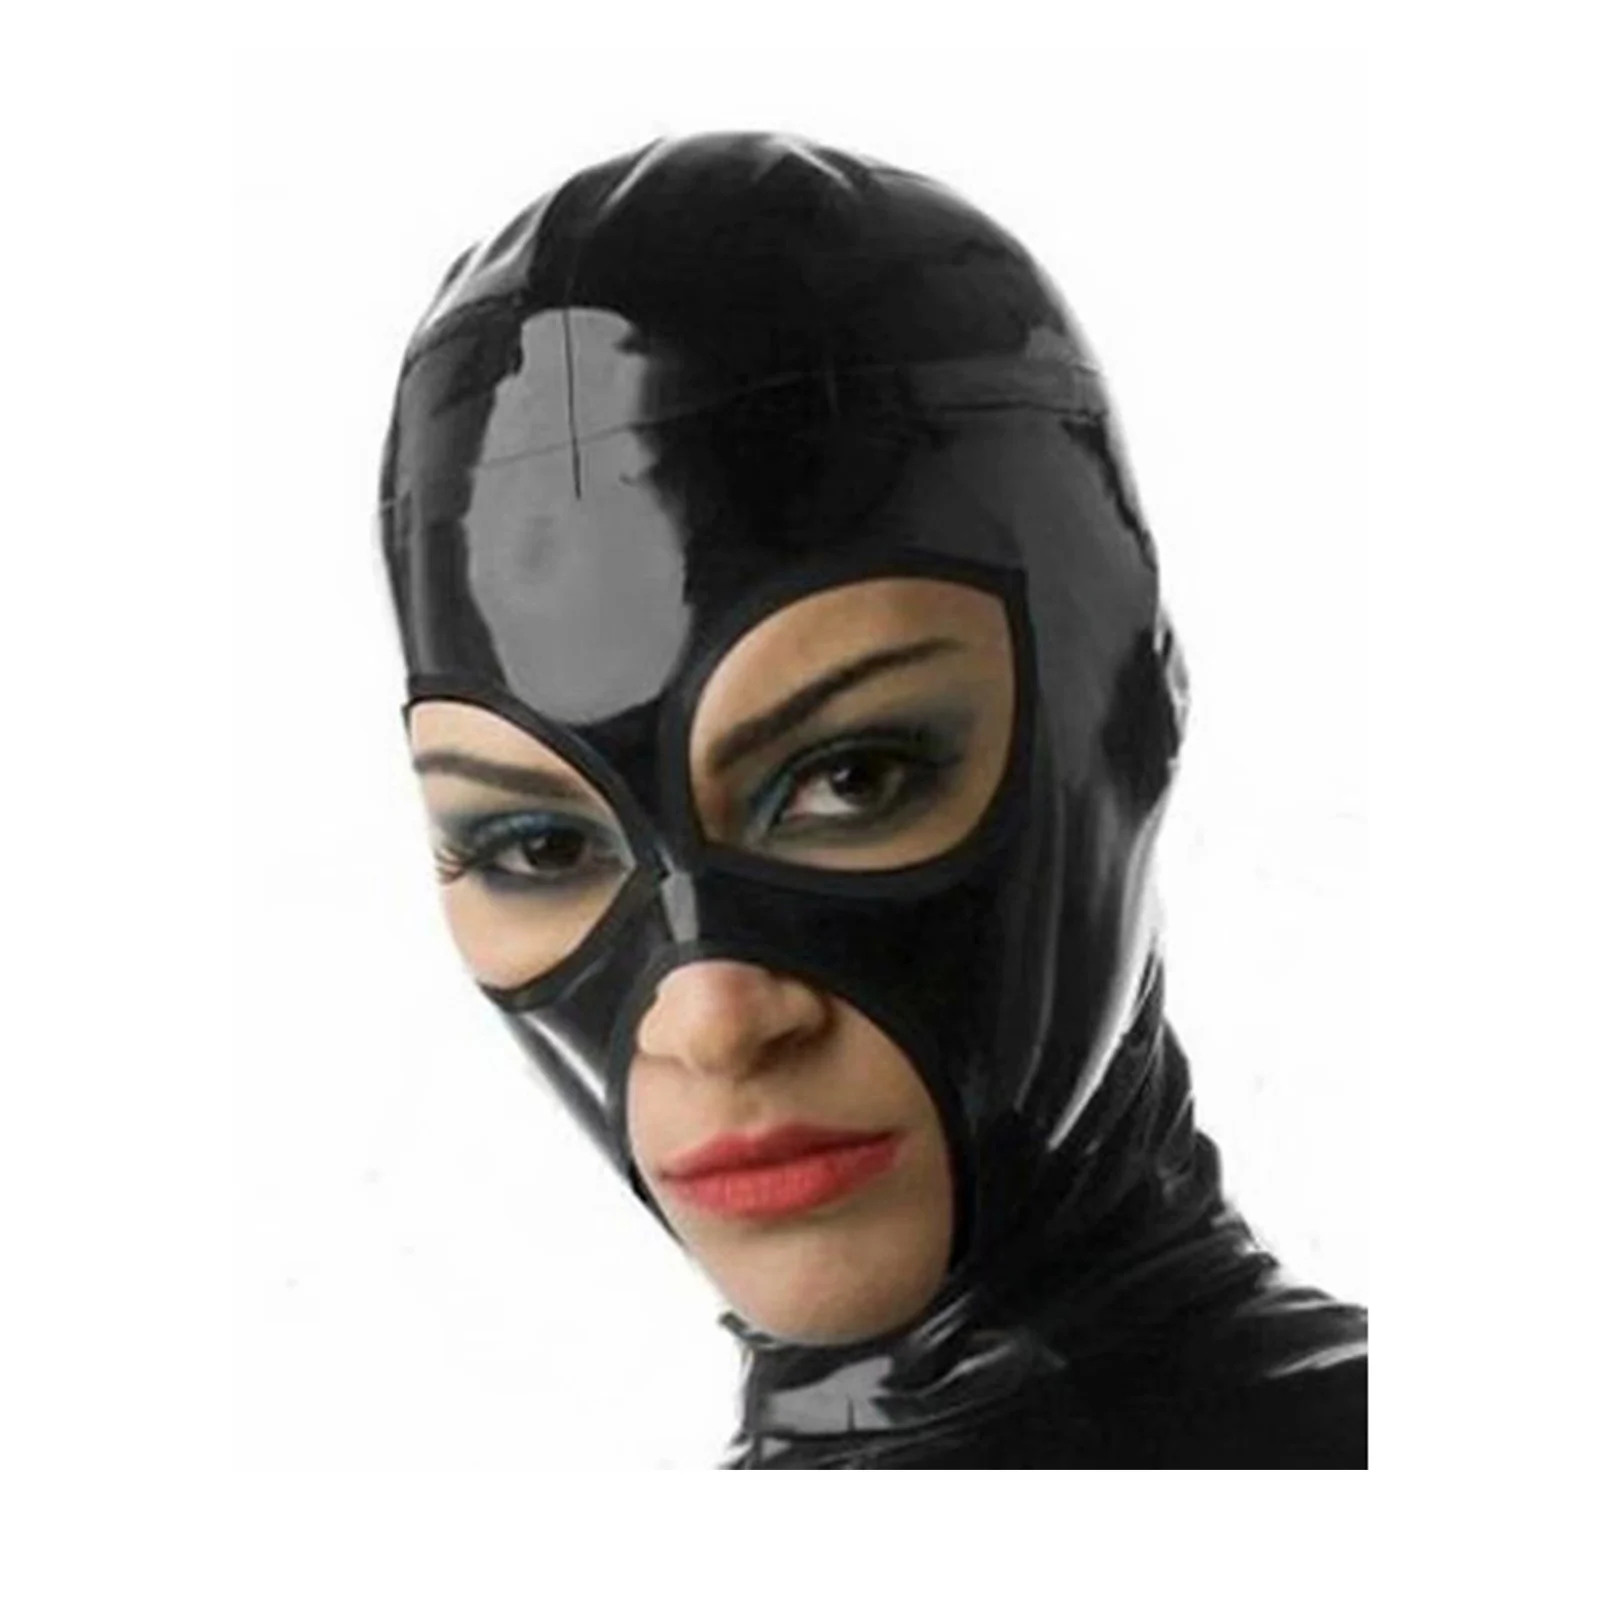 MONNIK Latex Mask Black Rubber Unisex Hood Open Eyes and Mouth Handmade for Latex Fetish Party Catsuit Halloween Clubwear monnik latex mask unisex rubber hood open mouth